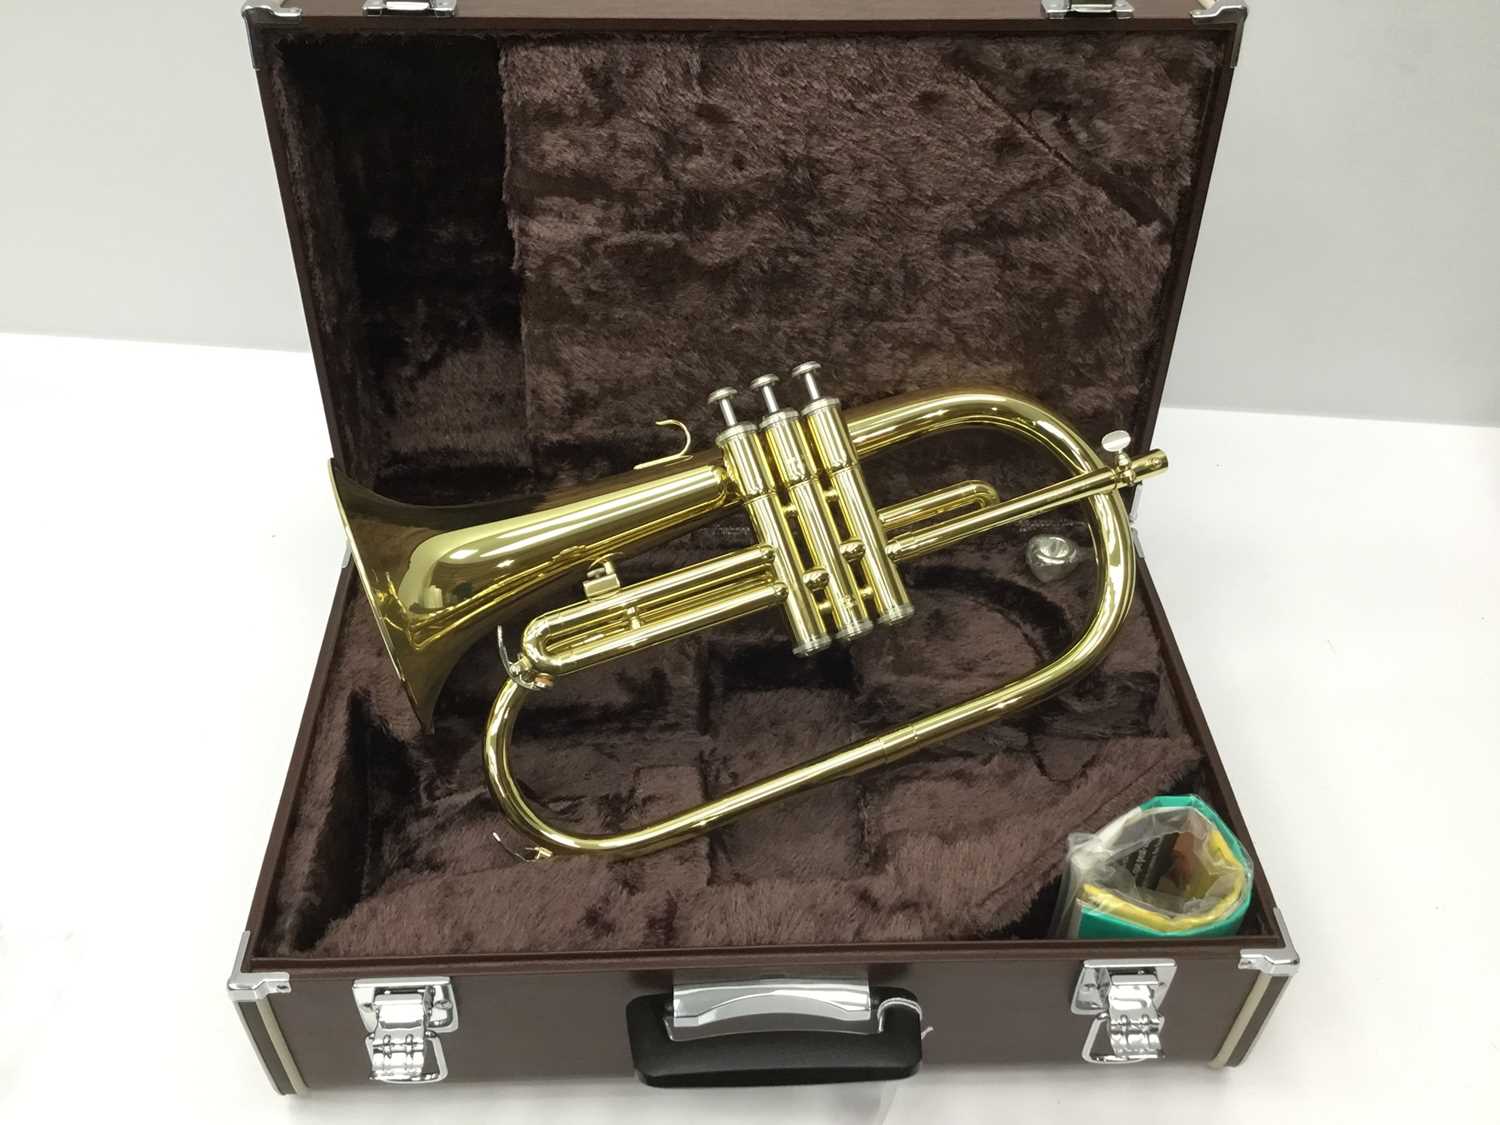 Lot 96 - Yamaha flugelhorn, model 2310, serial number 20530, with 11F4 mouthpiece, cased, with maintenance kit, condition as new